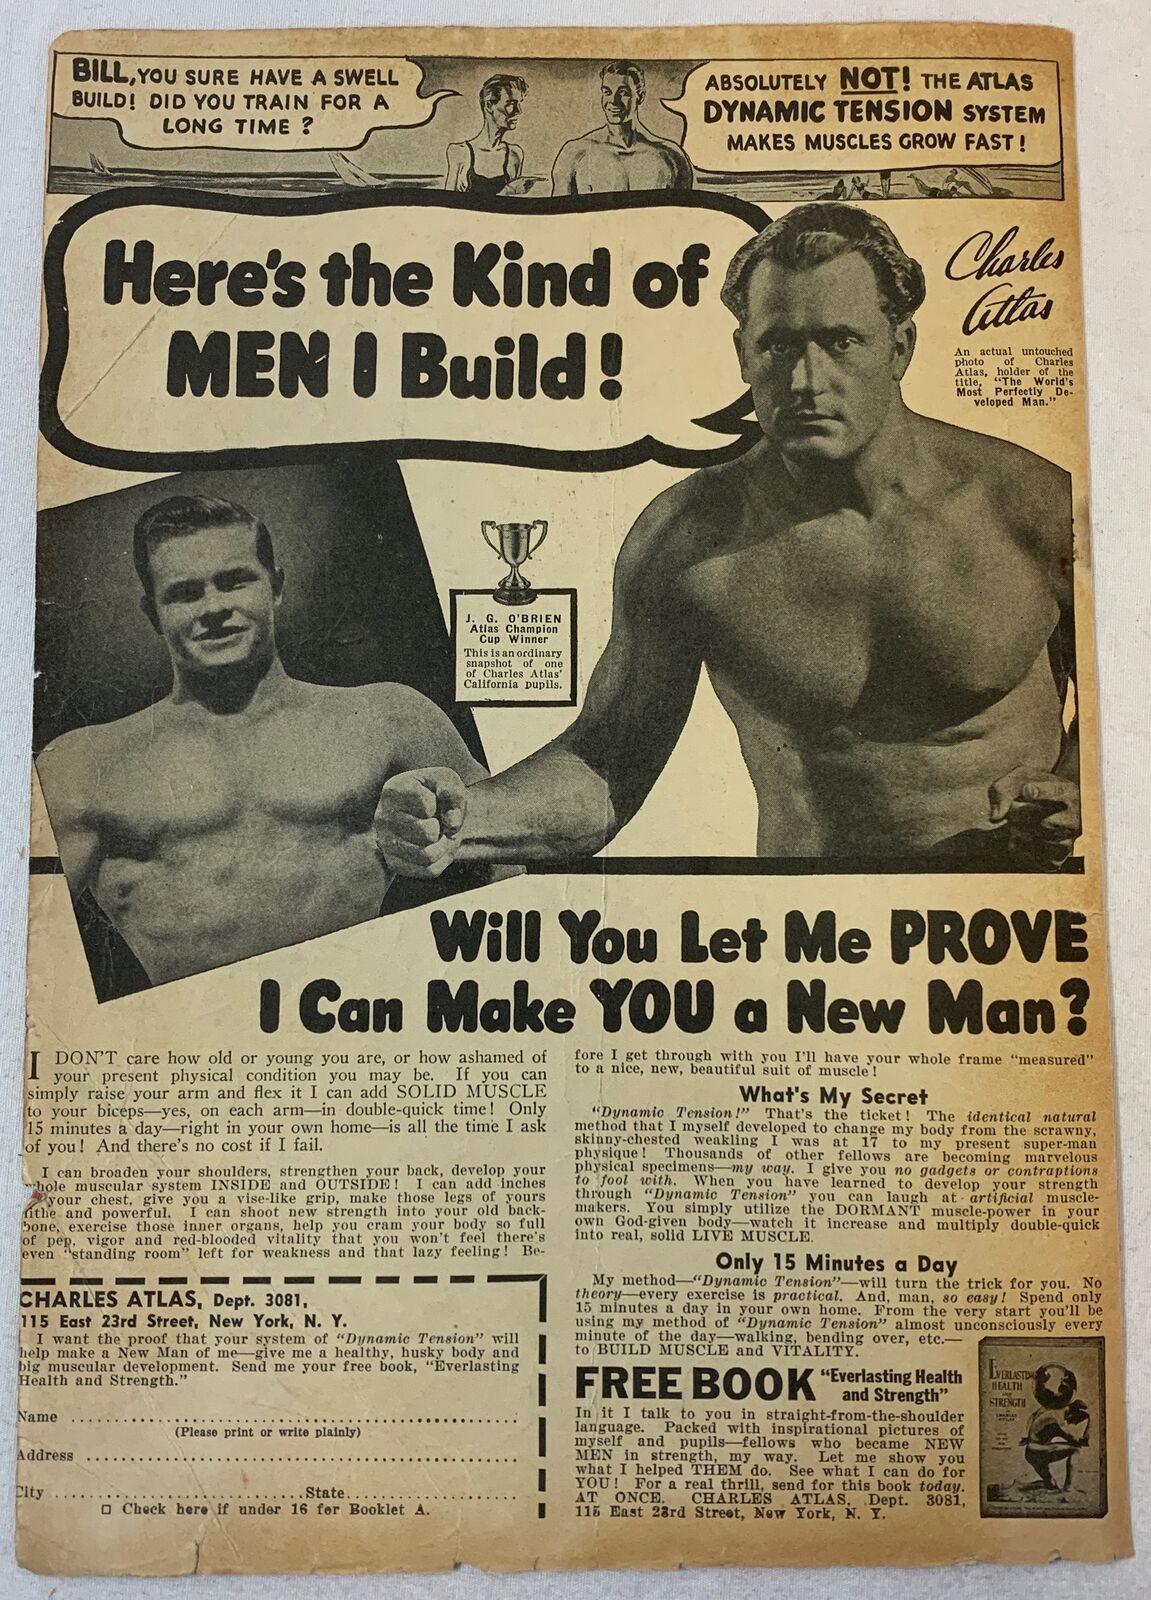 1943 CHARLES ATLAS ad ~ Here's The Kind Of Men I Build